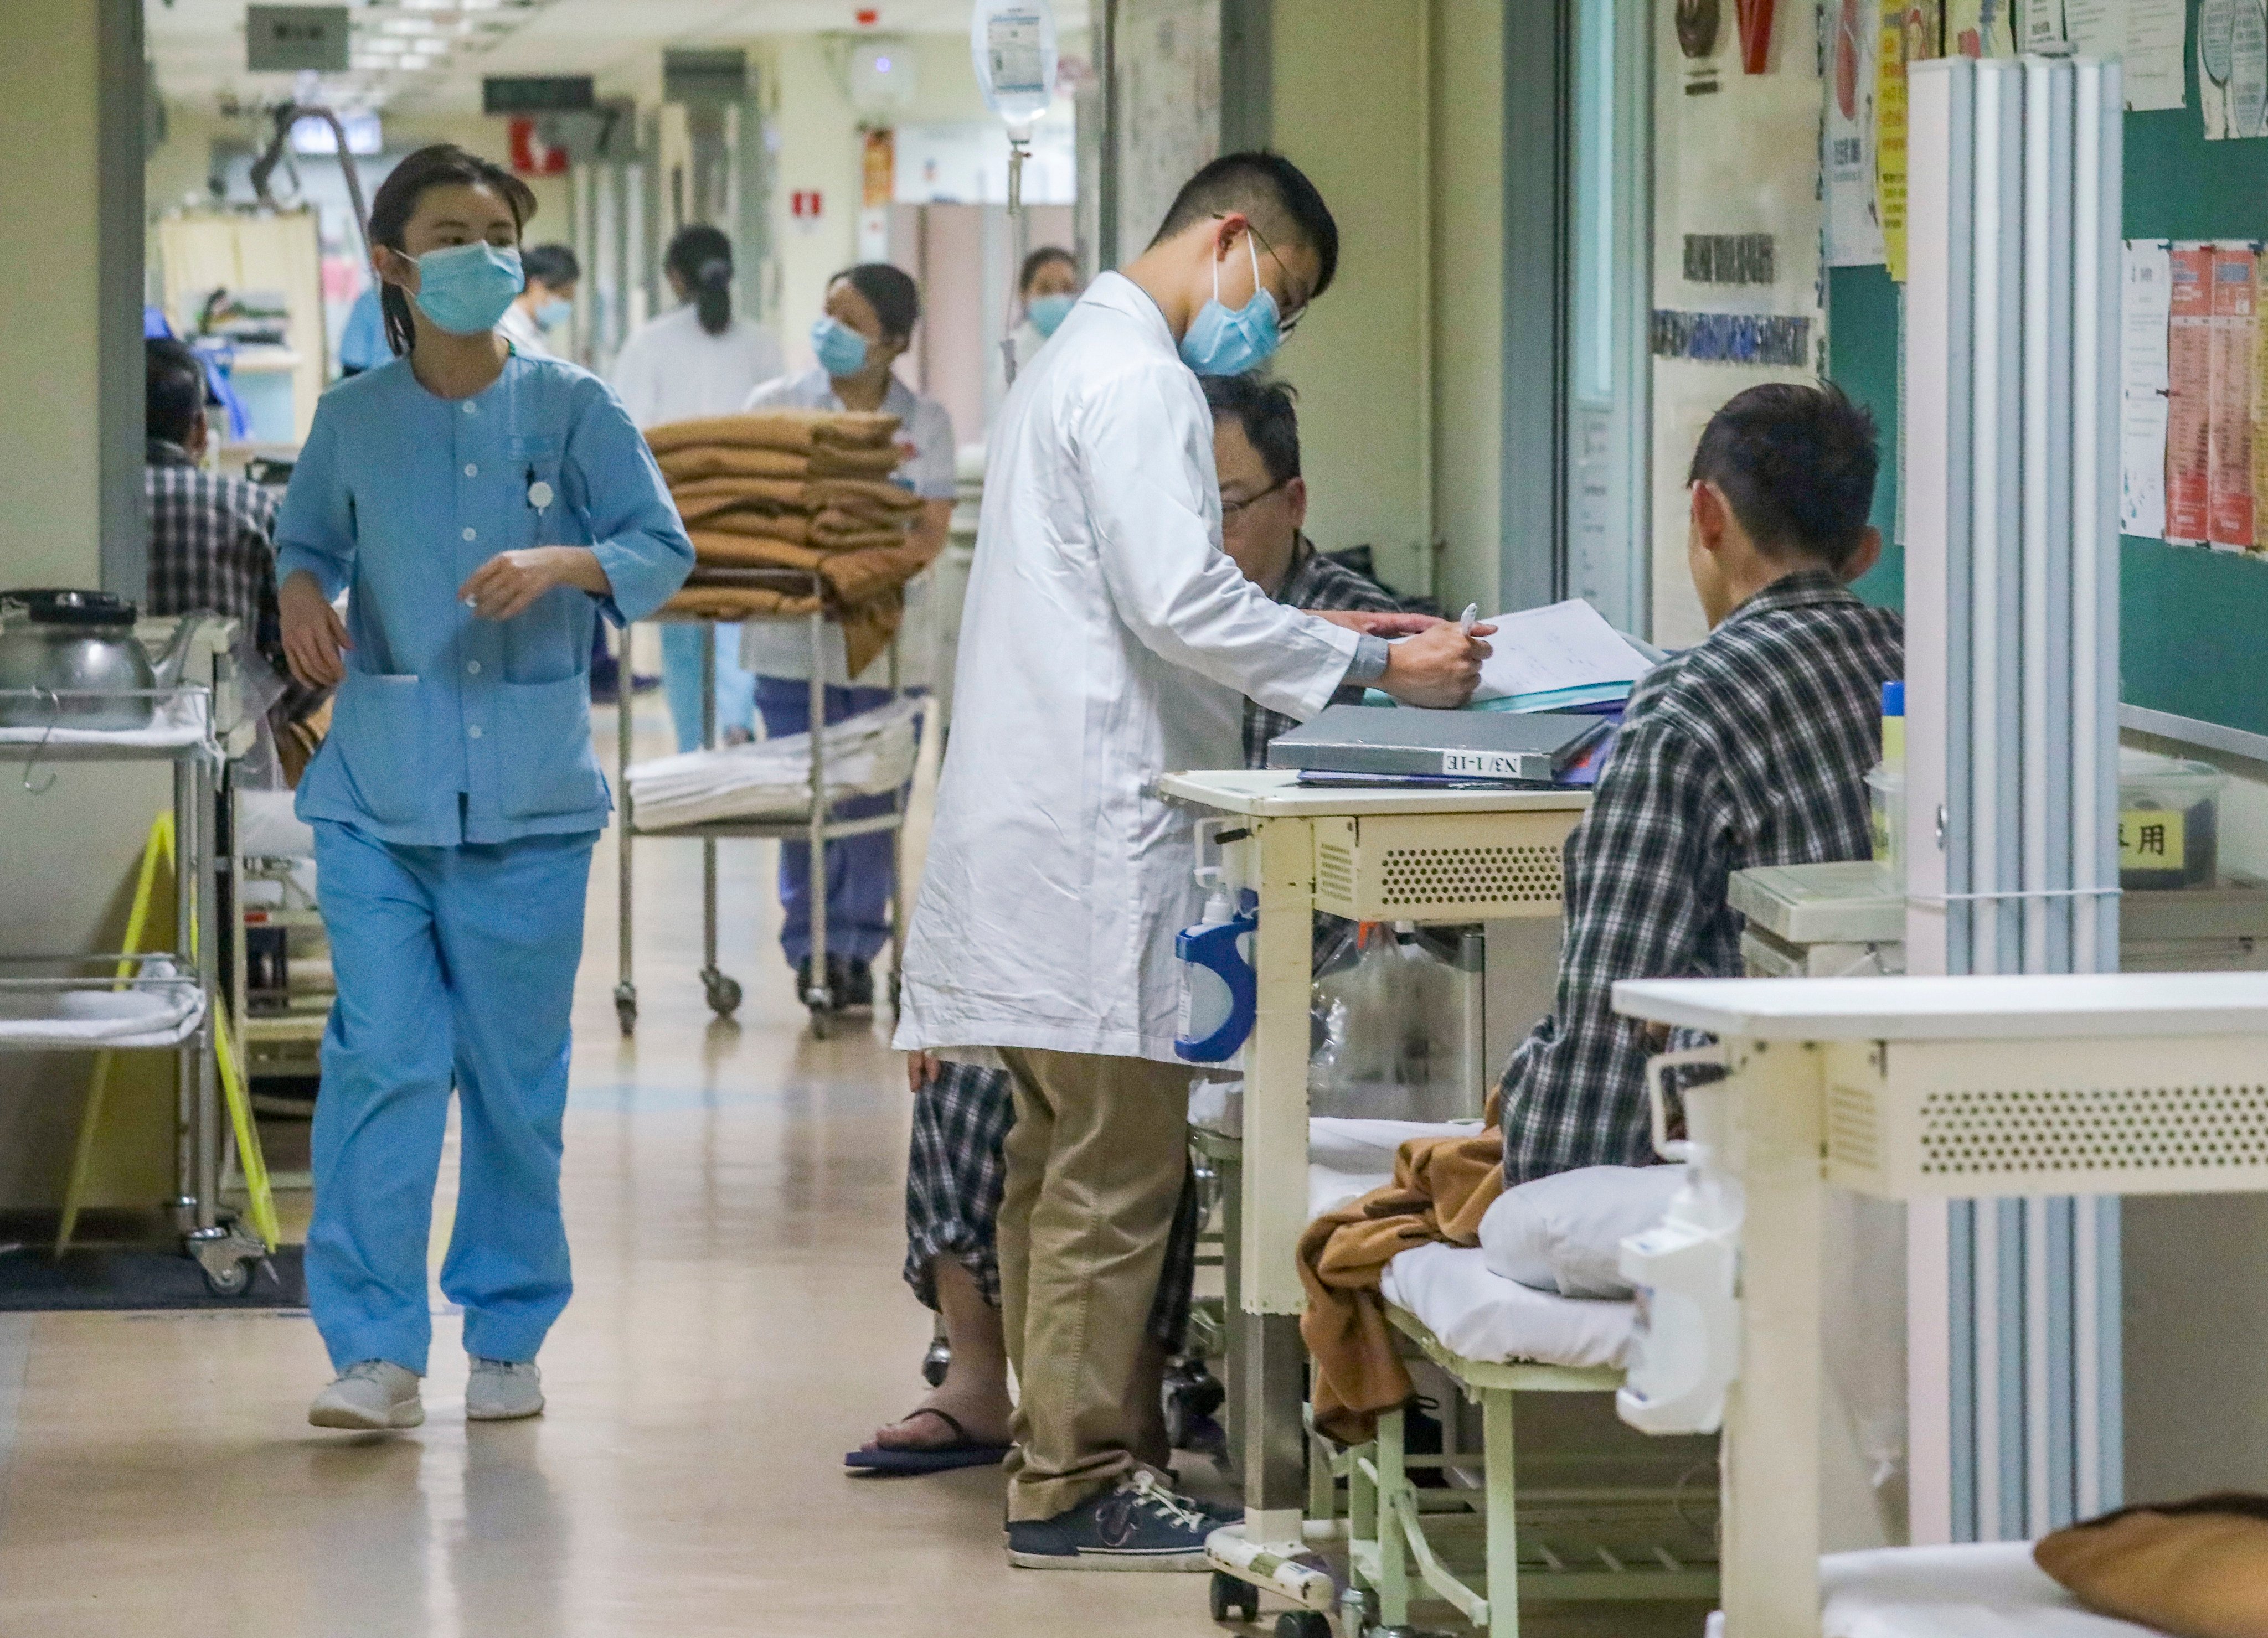 Hong Kong’s public hospitals have been strained by staff shortages. Photo: Nora Tam